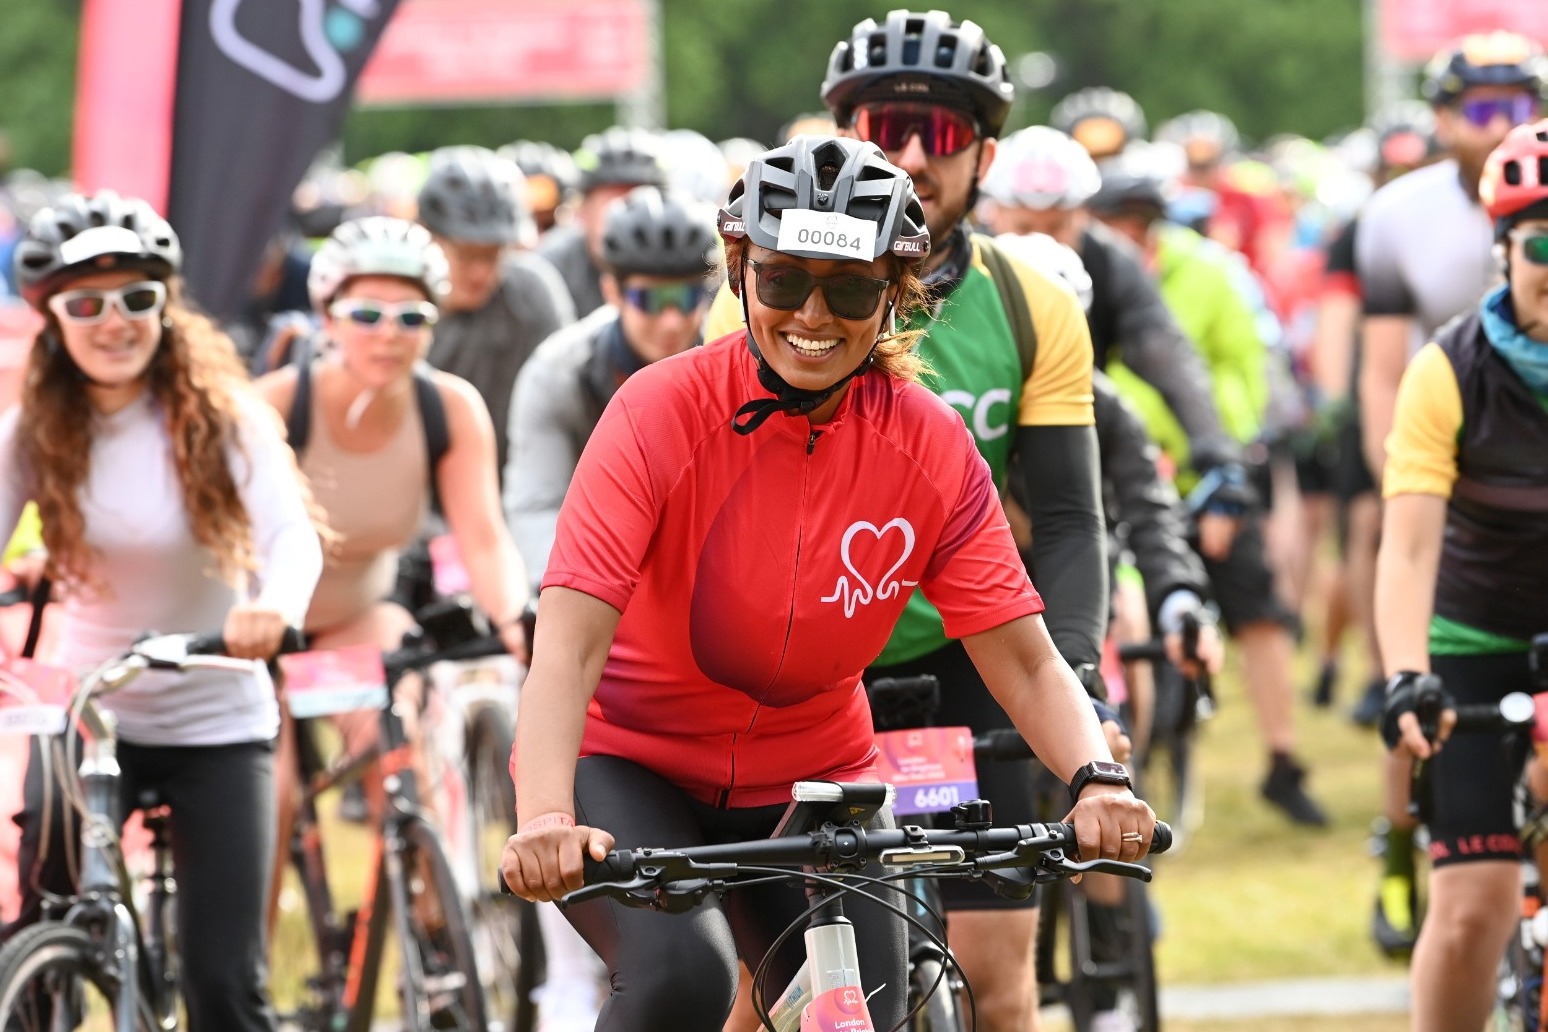 Sadiq Khan joins 14,000 people on fundraising bike ride from London to Brighton 